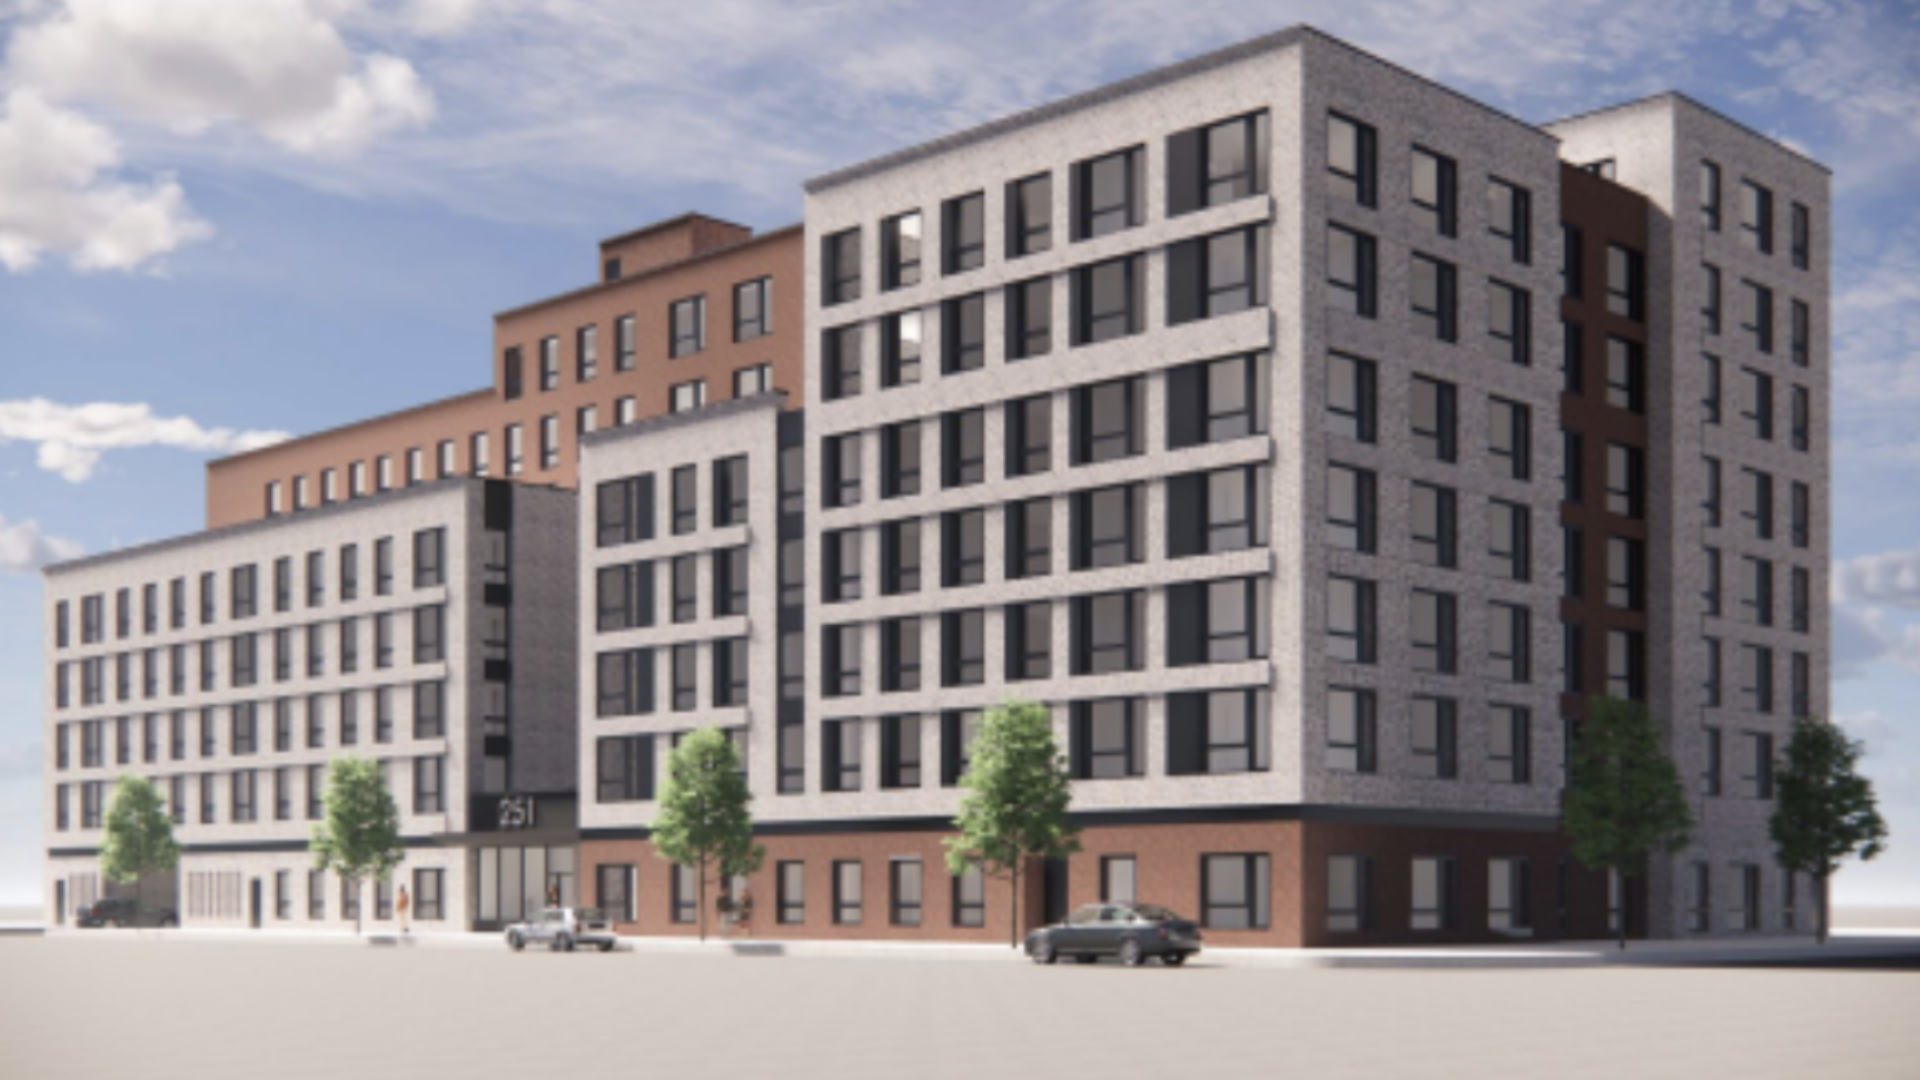 Brownsville affordable housing project lands $78M construction loan